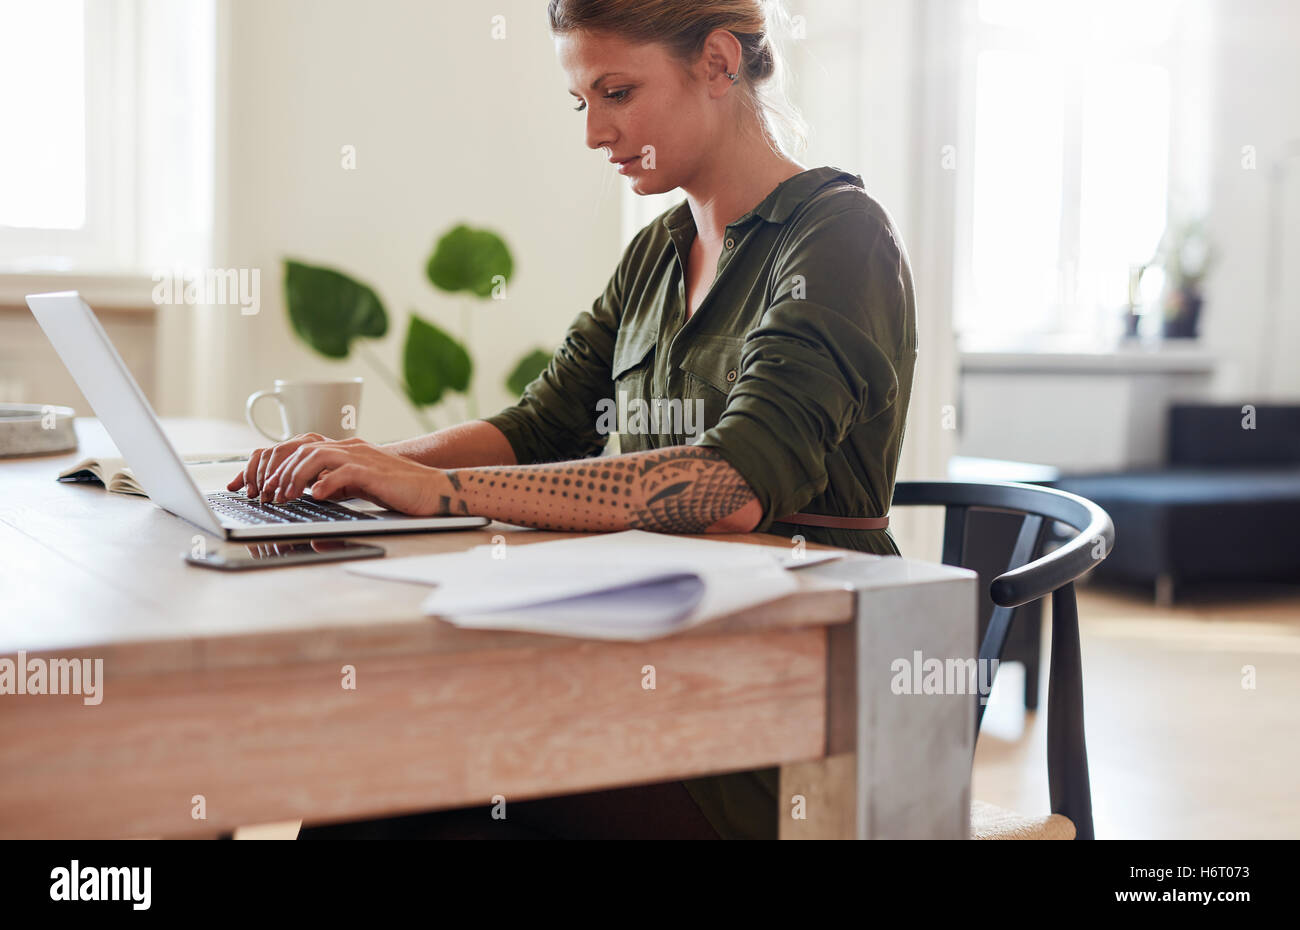 Shot of young woman sitting at table using laptop. Caucasian businesswoman working on laptop at home office. Stock Photo